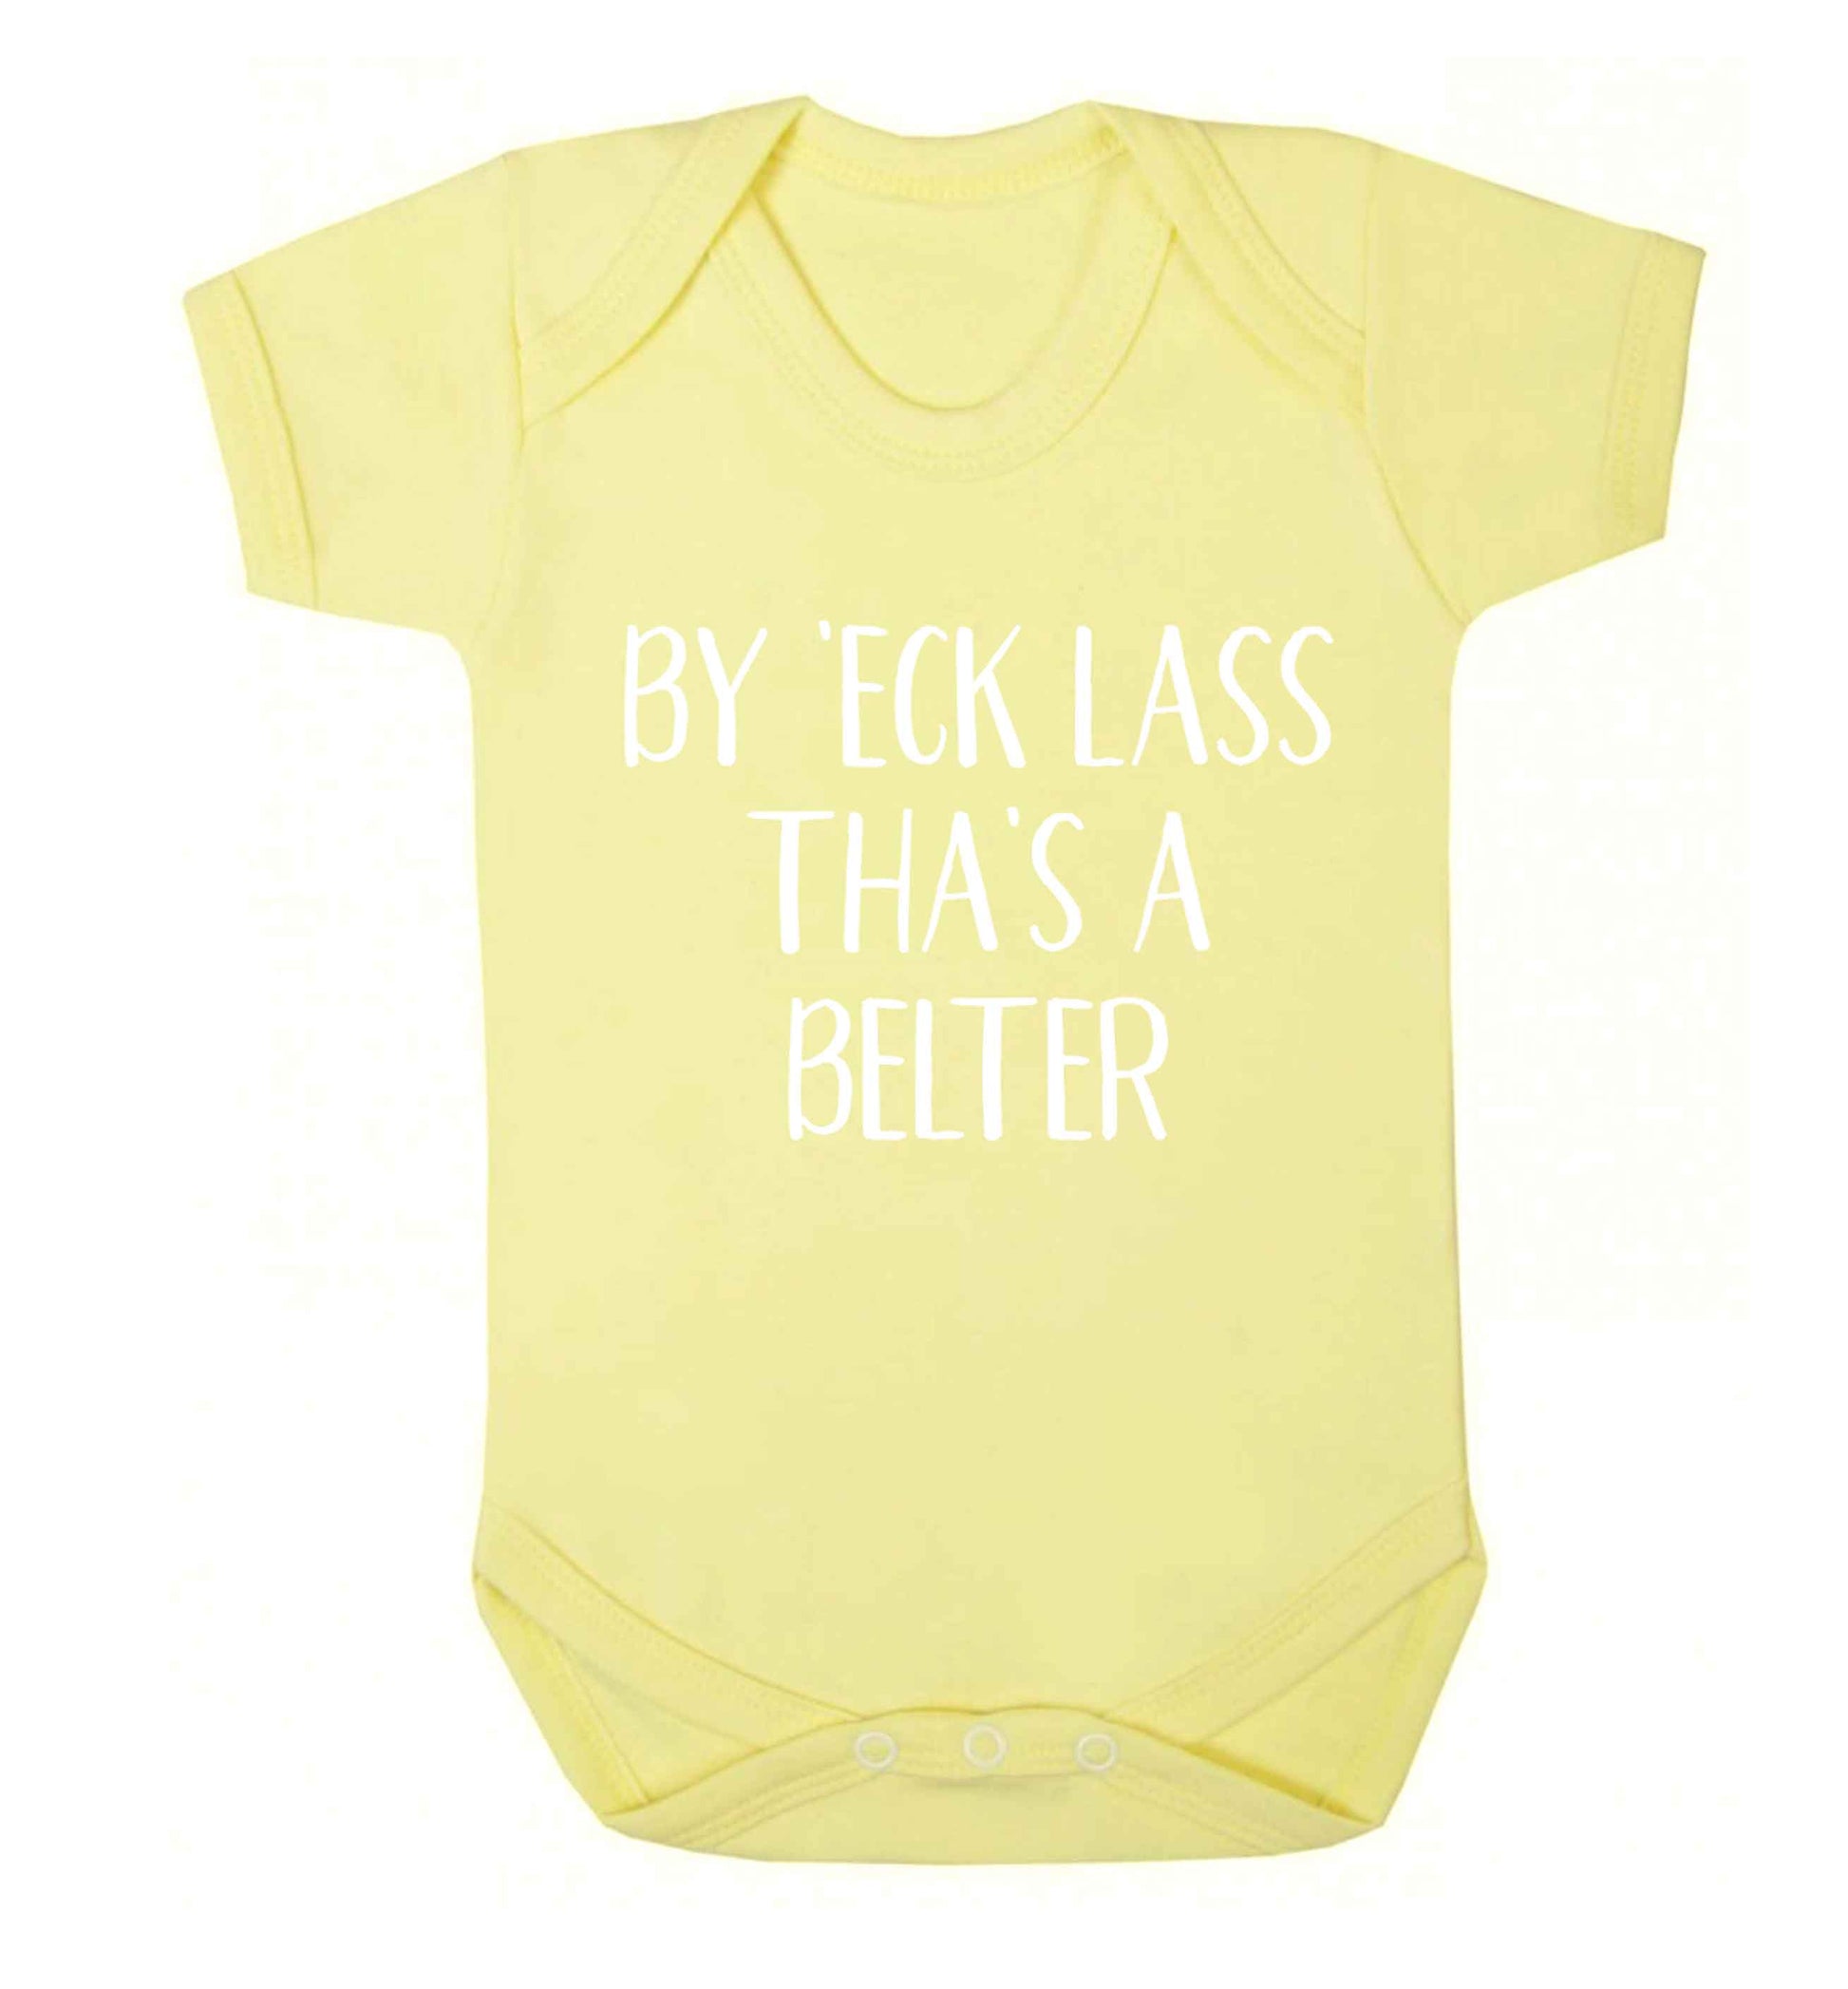 Be 'eck lass tha's a belter Baby Vest pale yellow 18-24 months